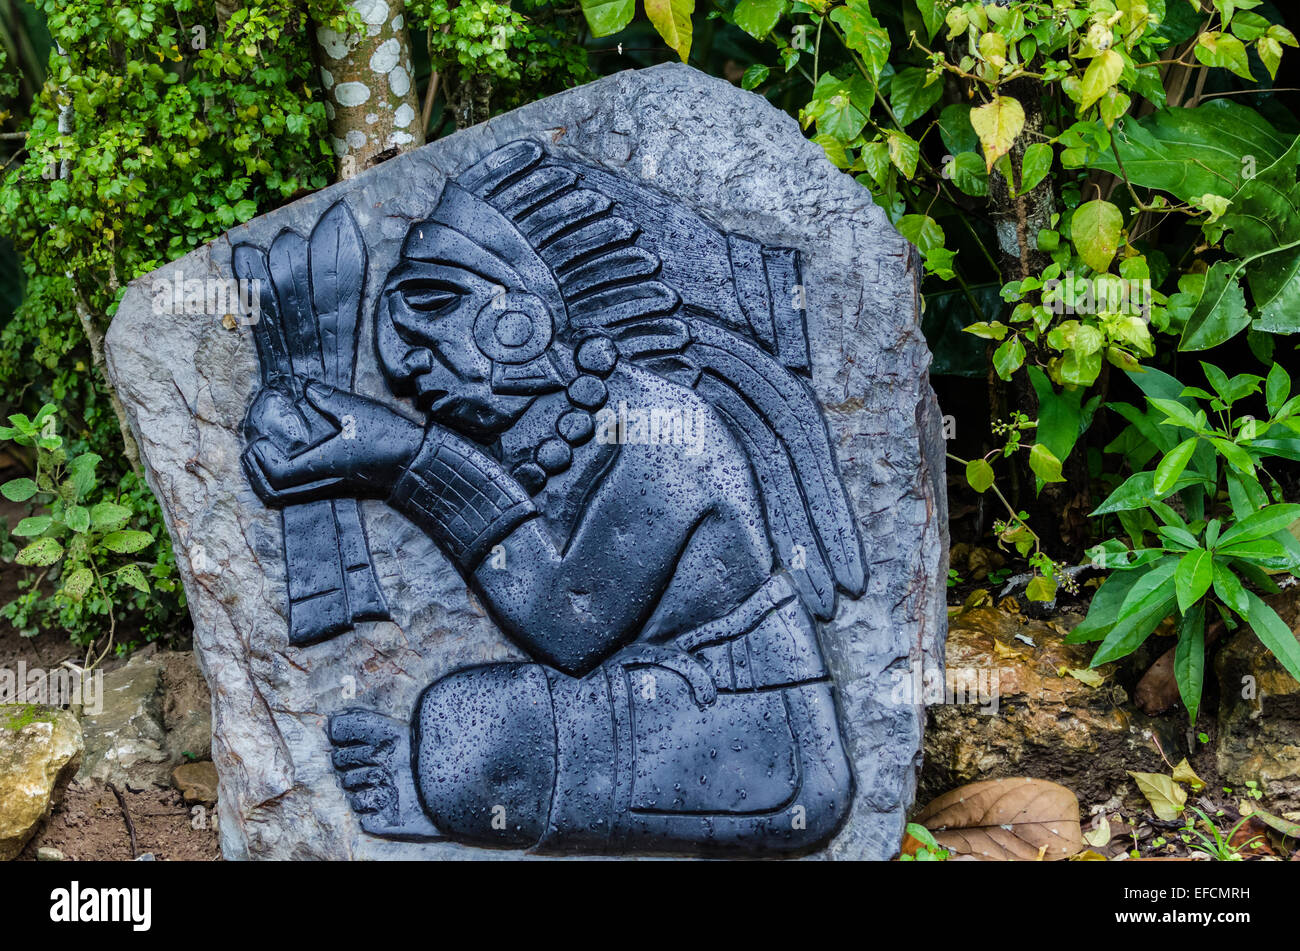 A stone carved Maya Indian figure. Belize, Central America. Stock Photo